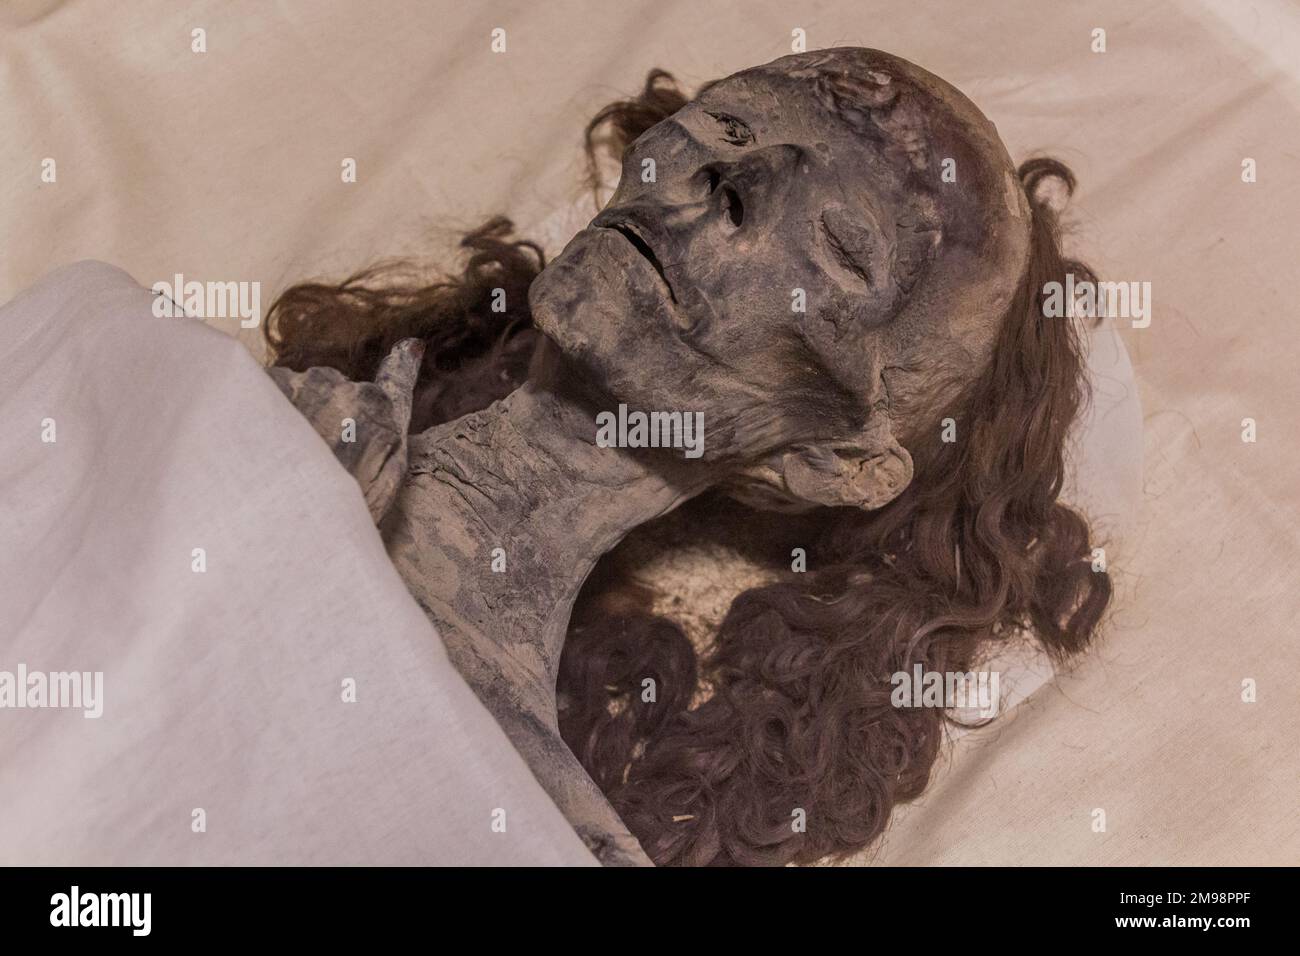 CAIRO, EGYPT - JANUARY 27, 2019: Queen Tiye in the Egyptian Museum in Cairo, Egypt Stock Photo